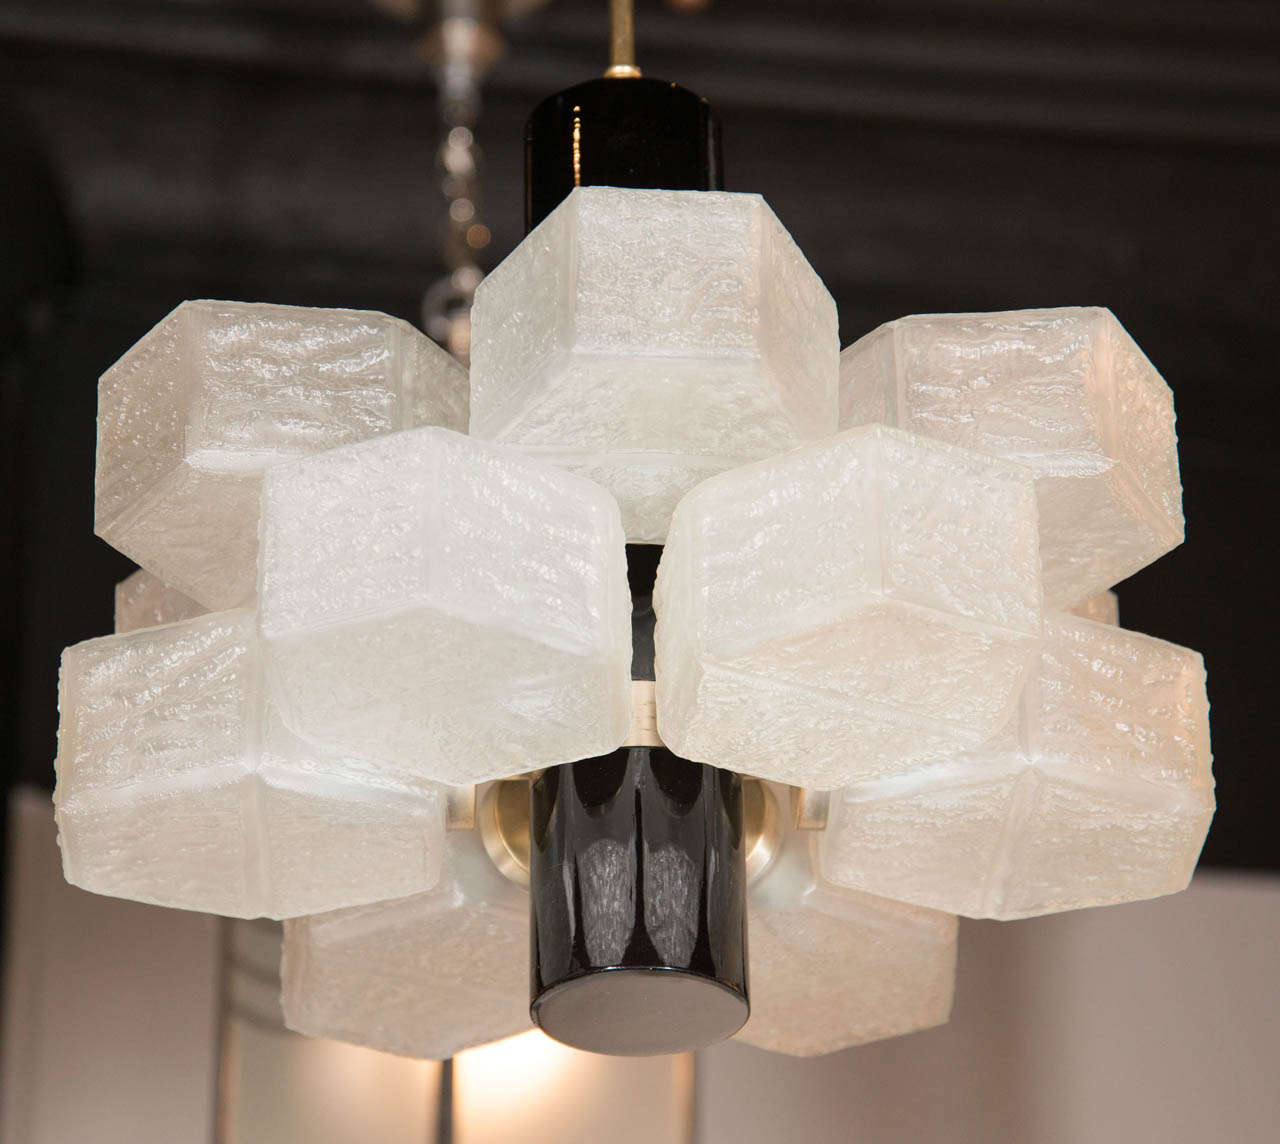 20th Century Sophisticated Mid-century Chandelier With Hexagonal Glass Globes